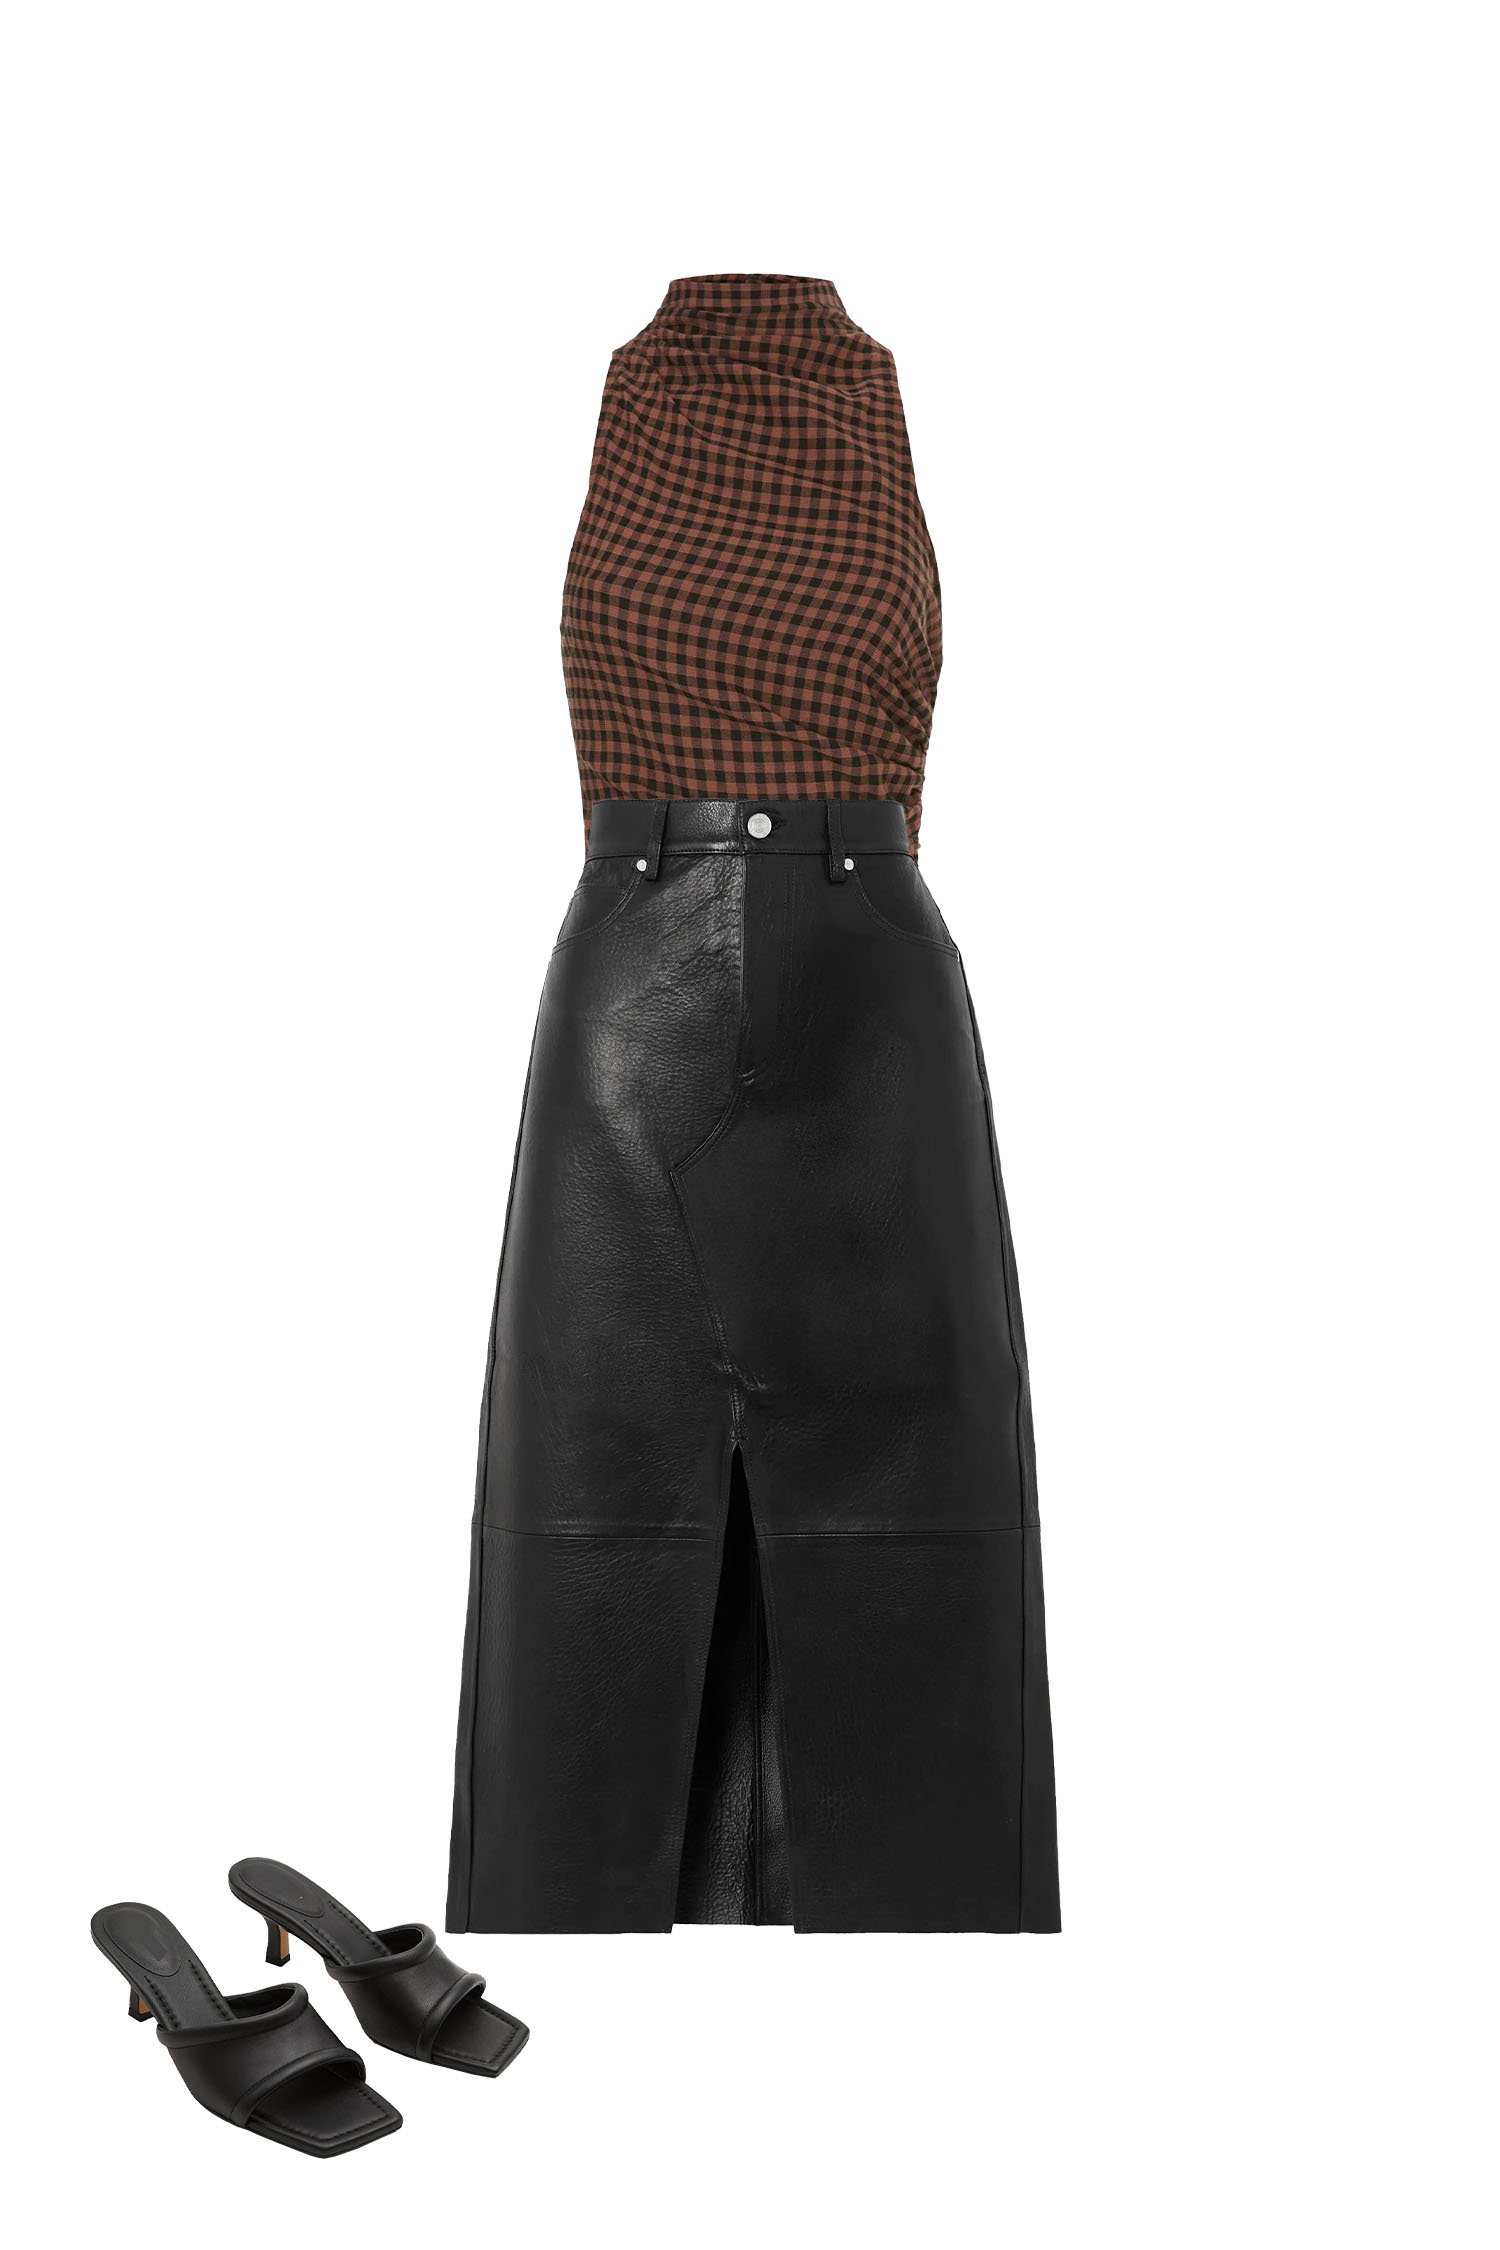 Black Leather Midi Skirt Outfit with Brown Check Print Sleeveless Top and Black Square Toe Kitten Heel Sandals